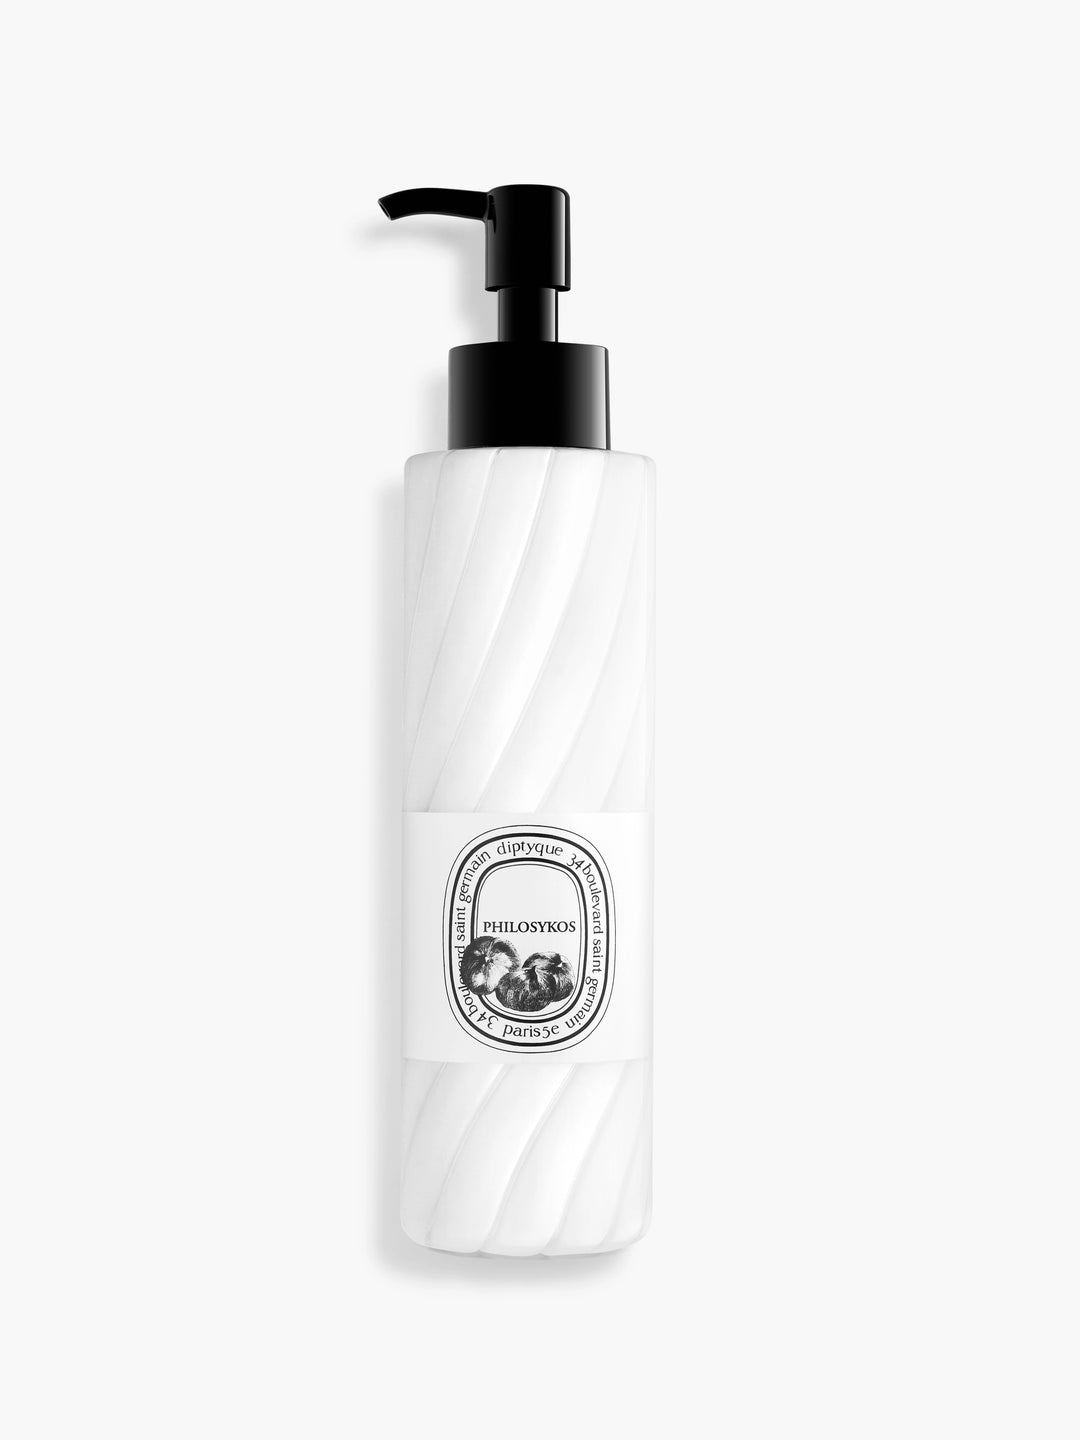 Diptyque- Hand and Body Lotion in Philosykos